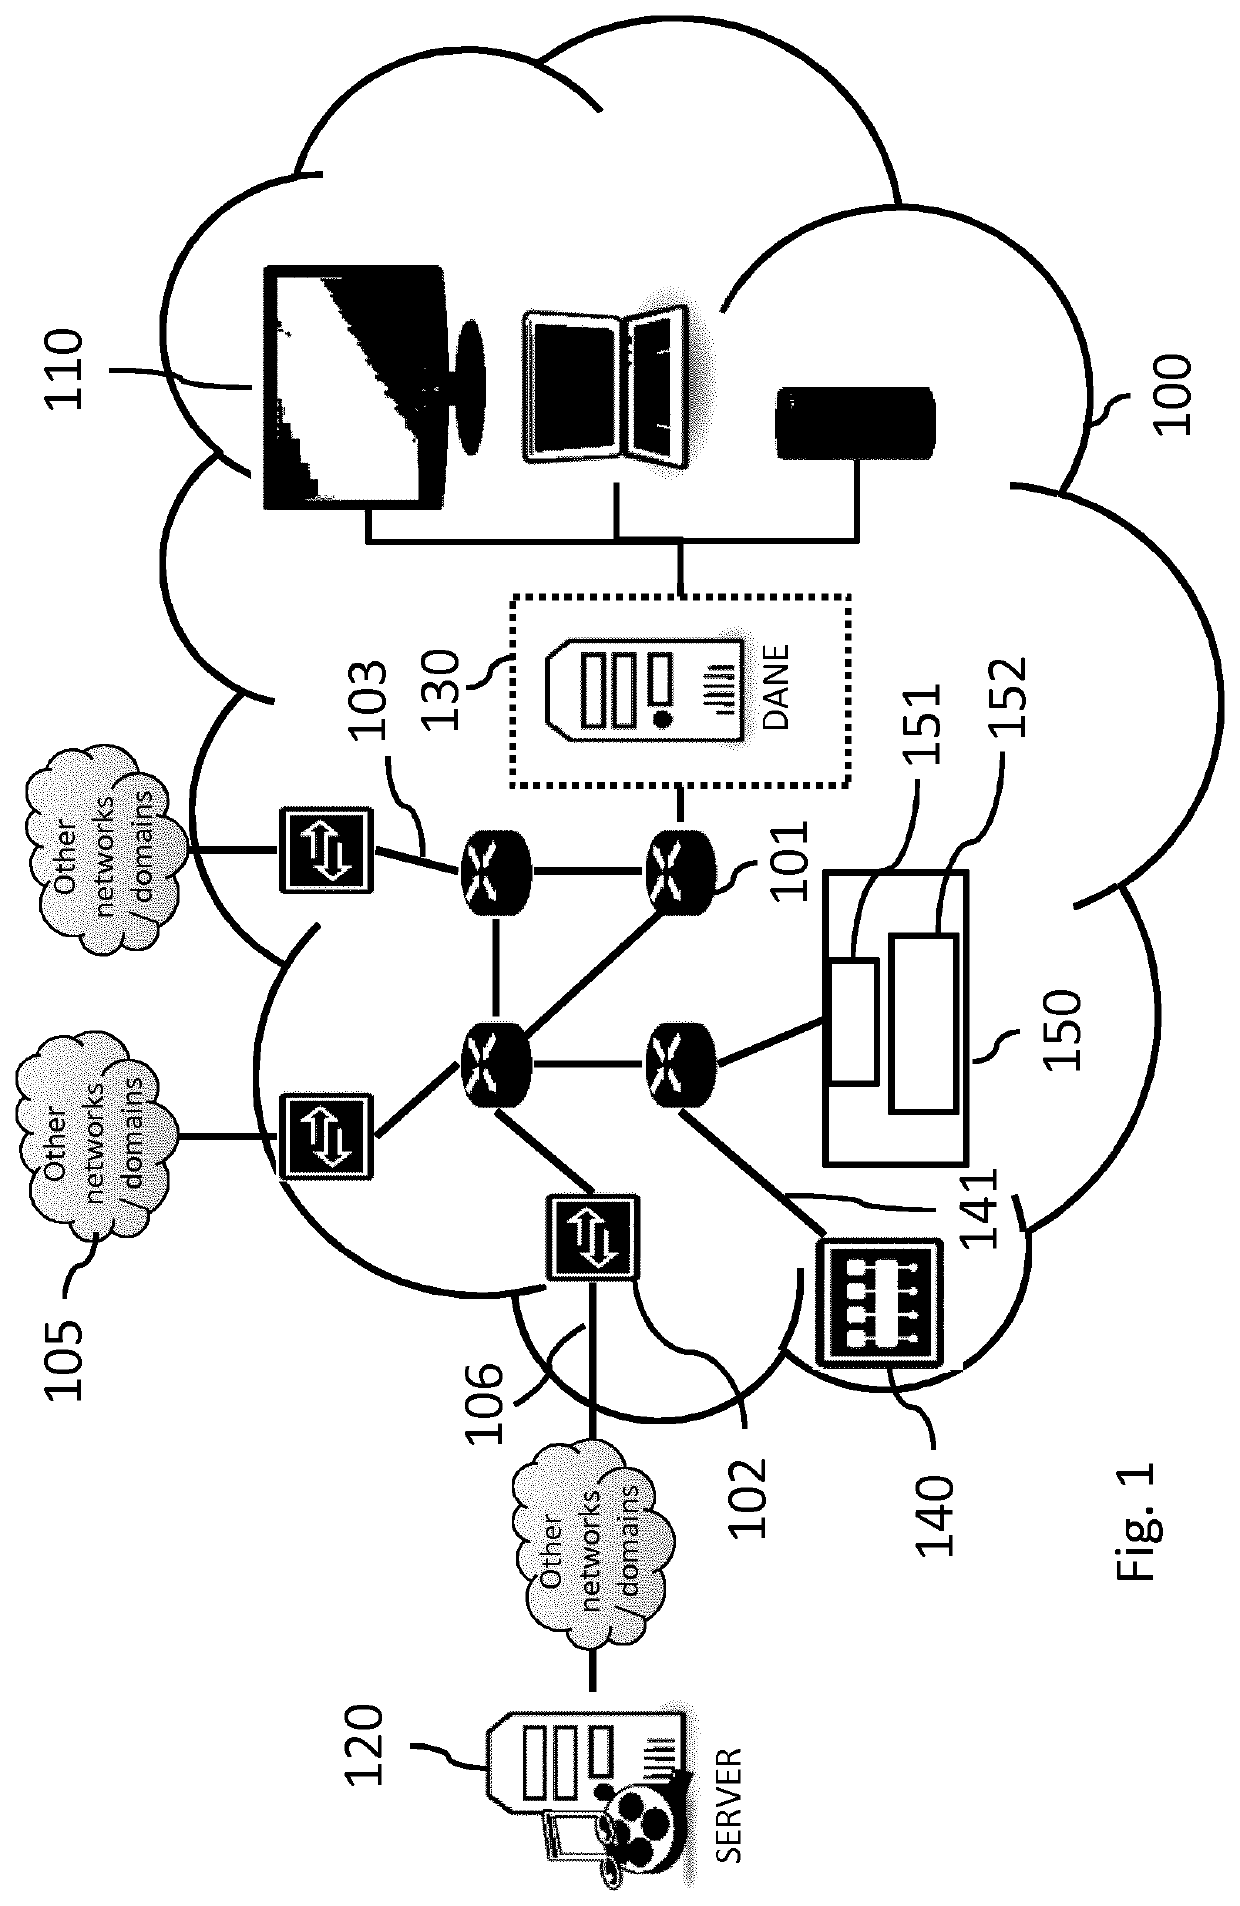 Stream control system for use in a network